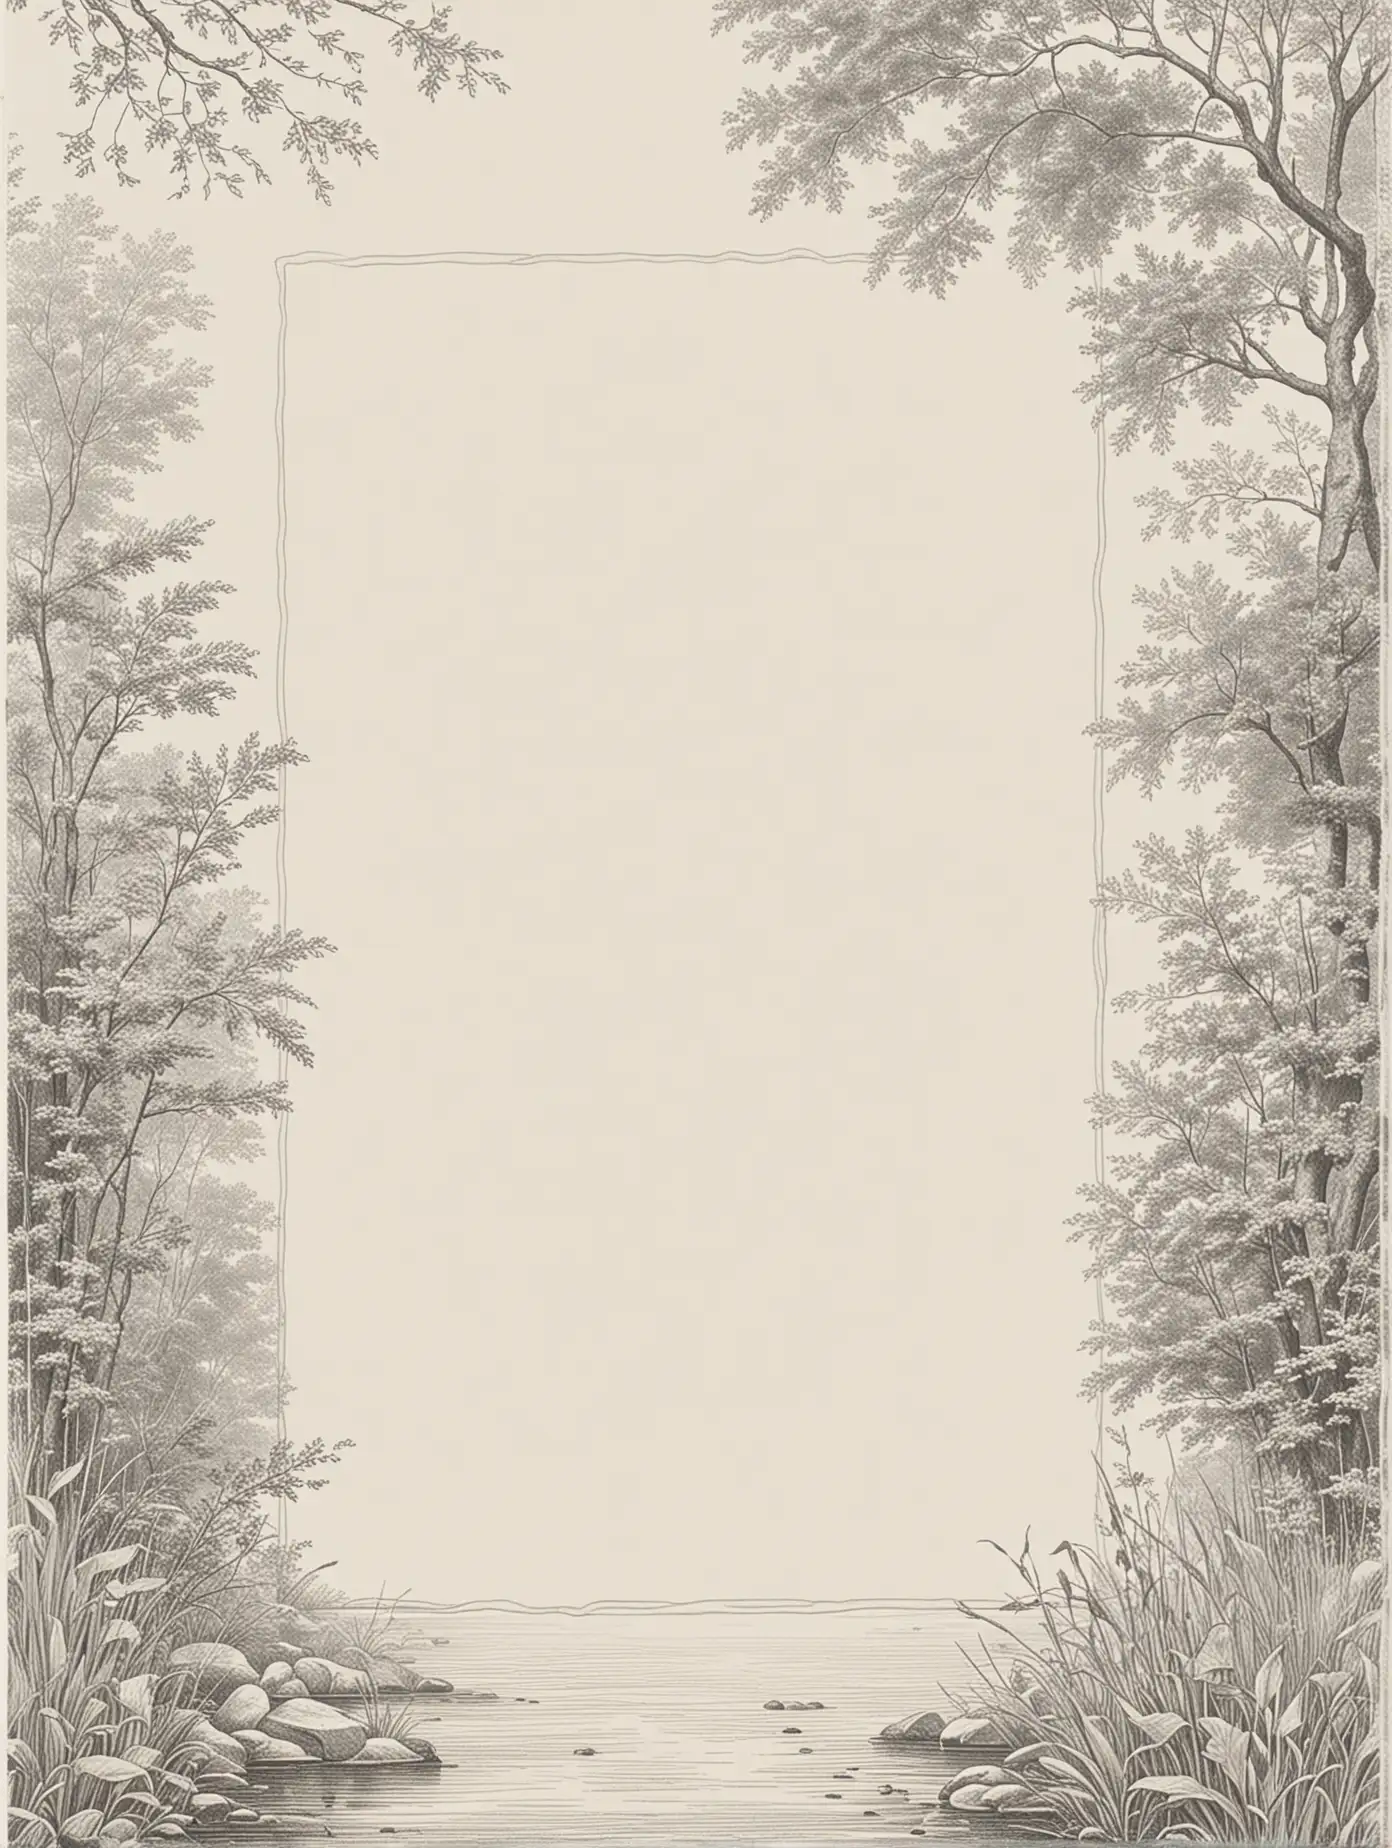 A blank book cover with a river border